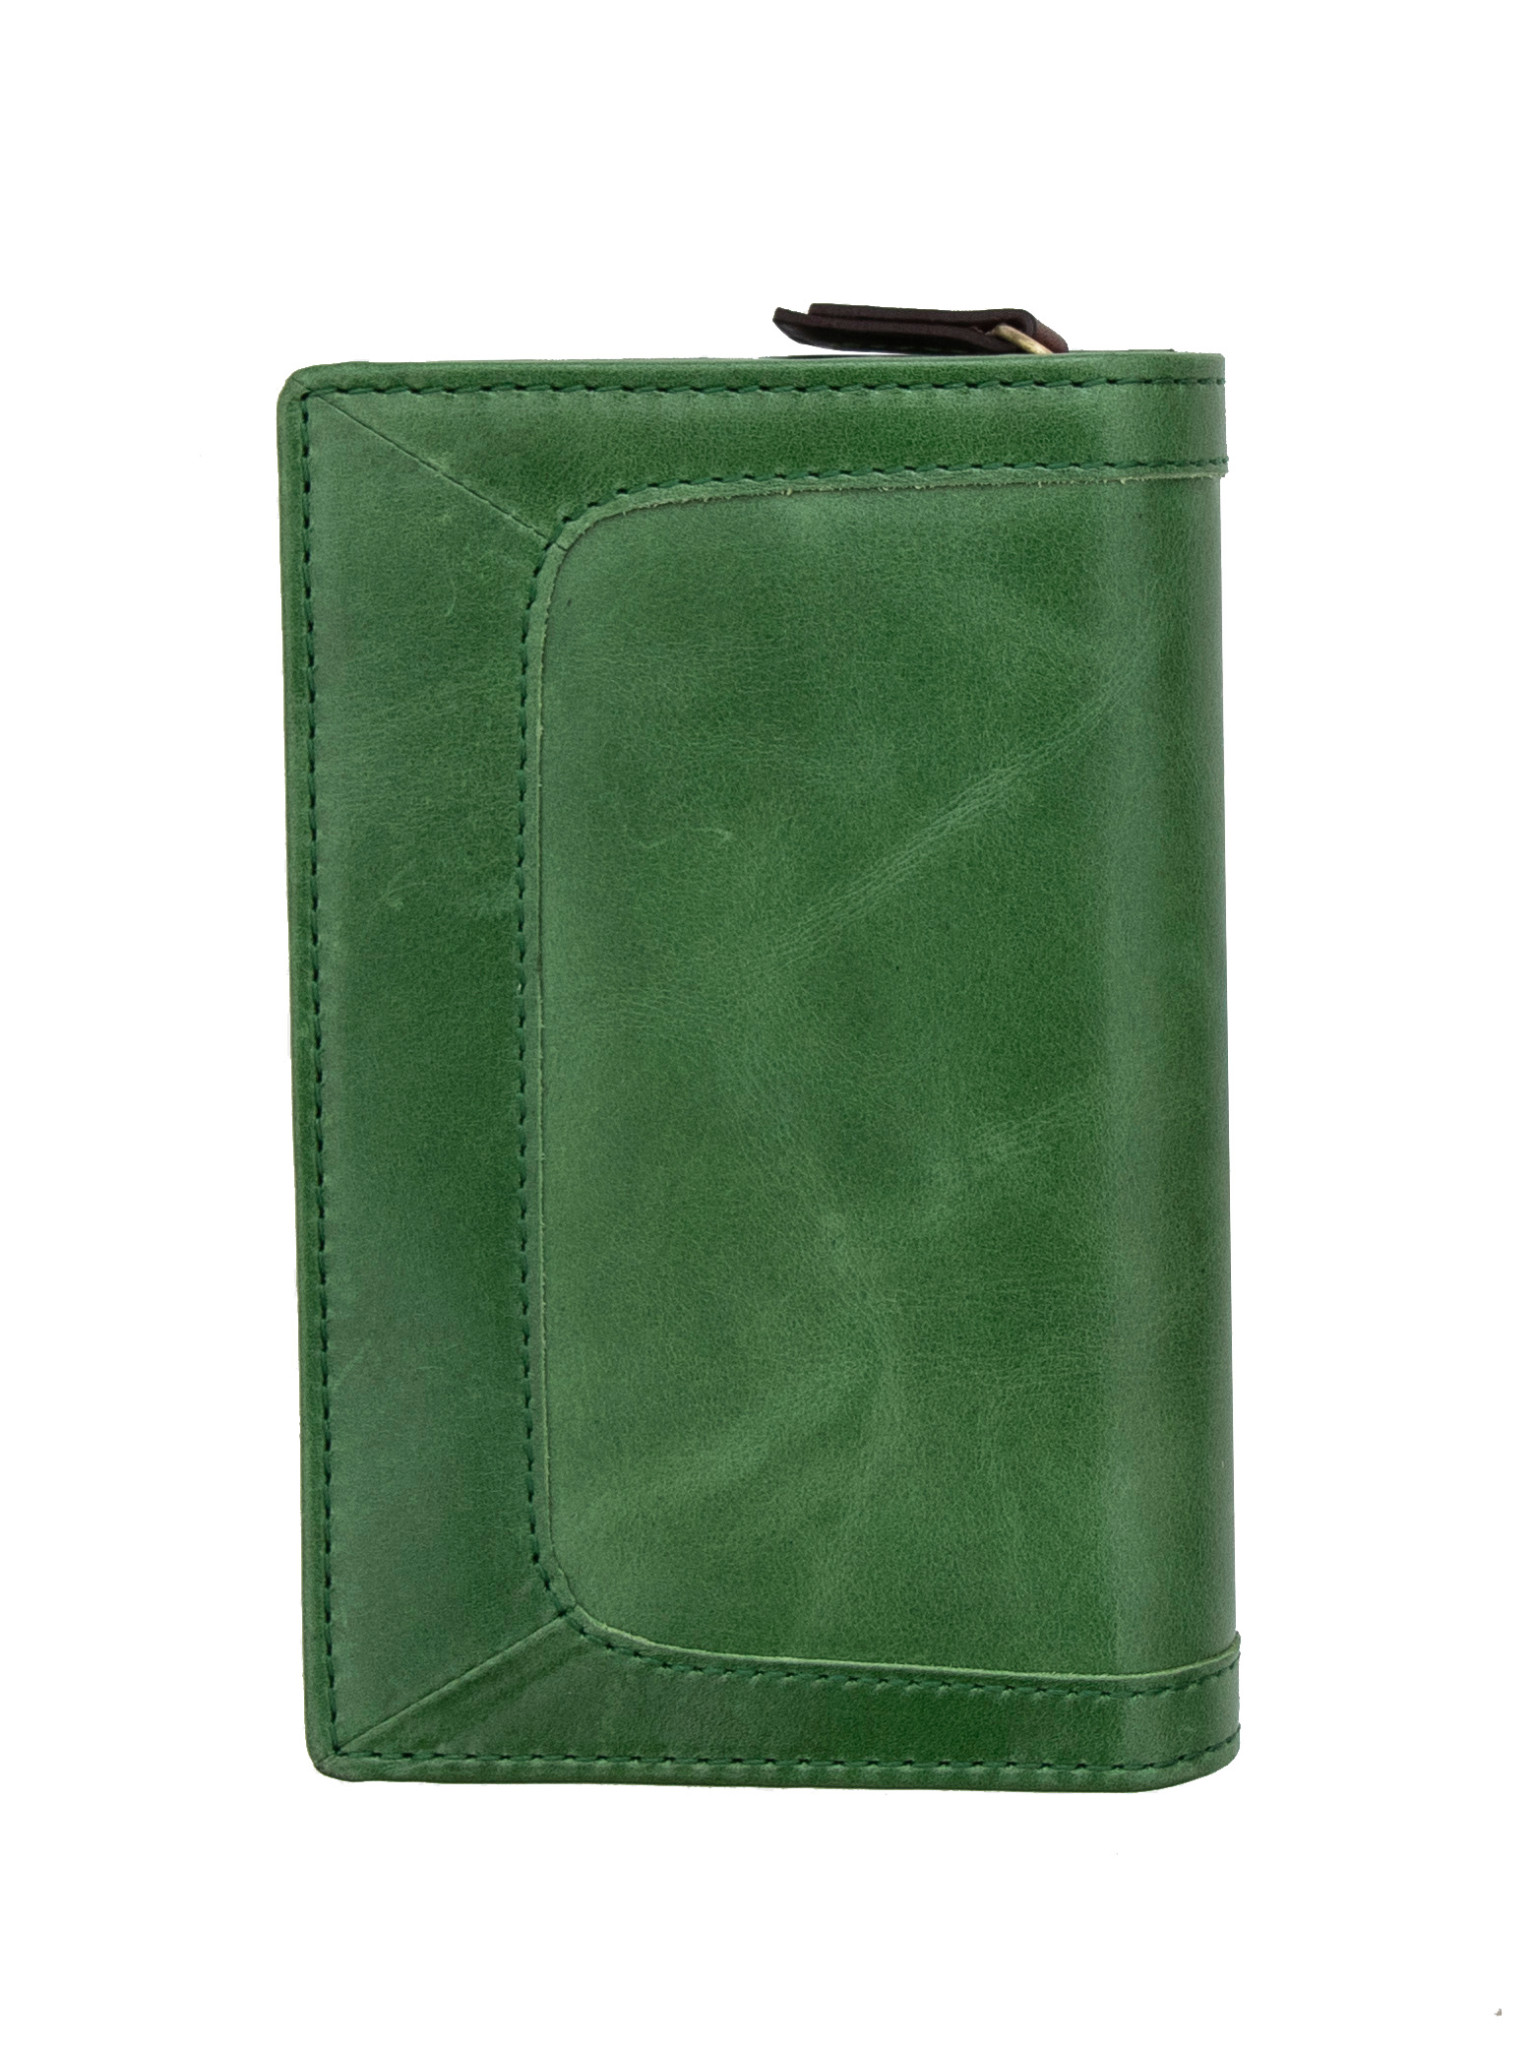 Prime Hide Orchard Womens Green Leather Bifold Wallet Purse RFID Blocking NEW